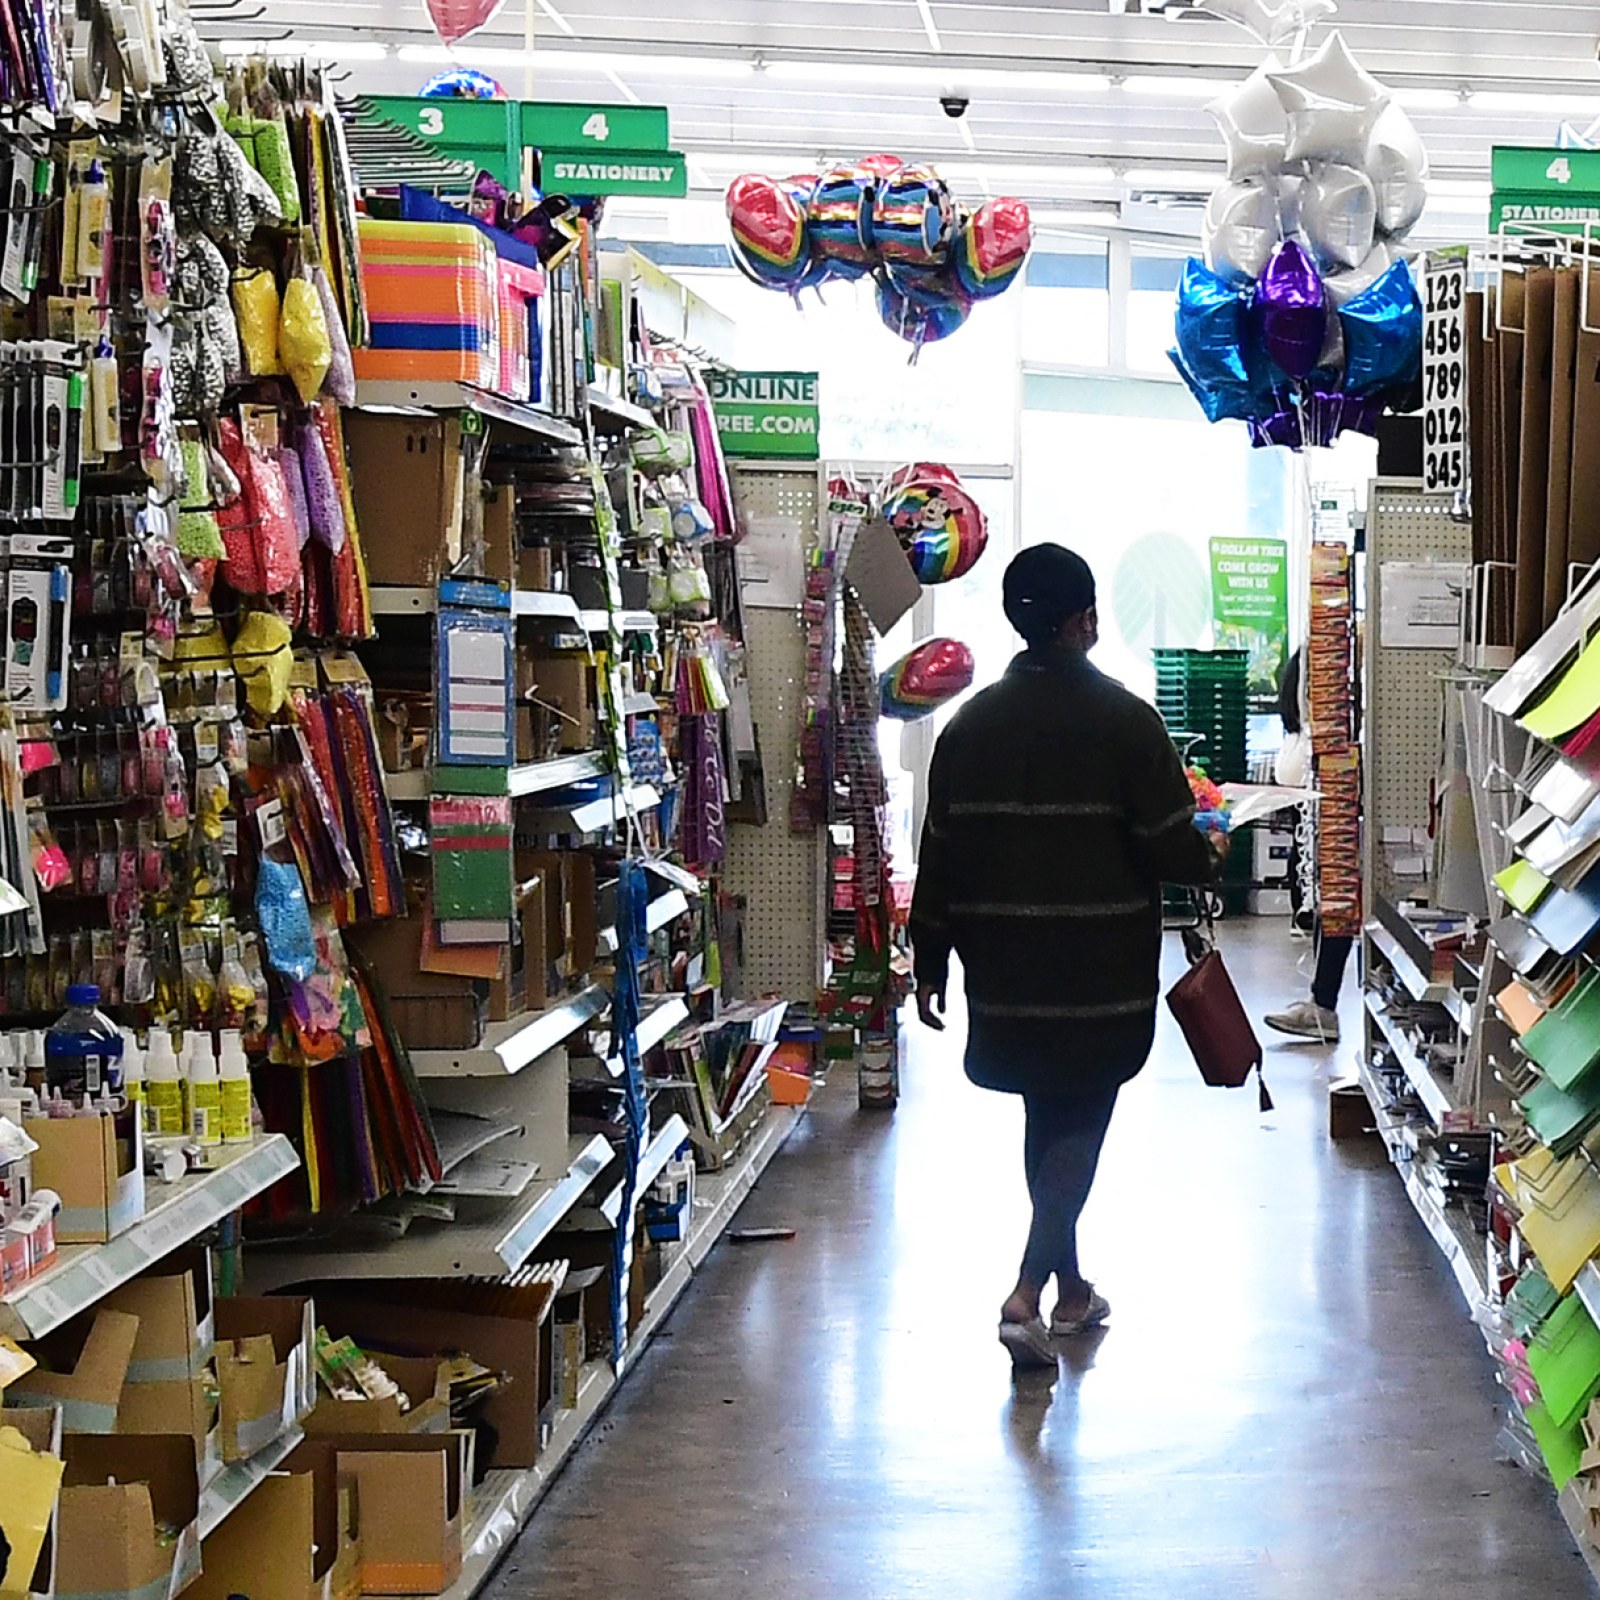 Some Dollar Tree items will now cost more than a dollar